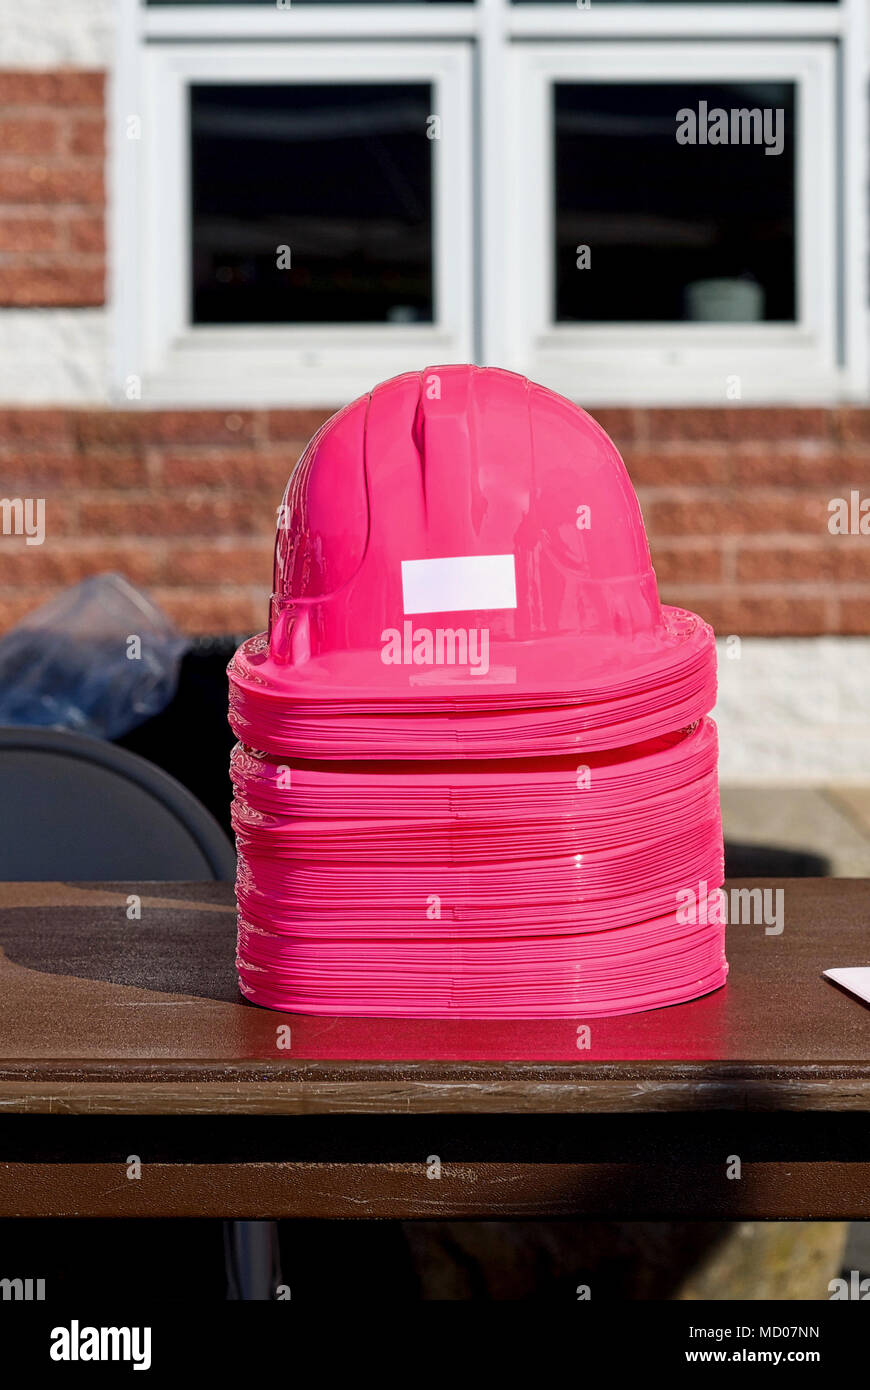 A stacked pile of pink plastic hardhats on a table. Stock Photo